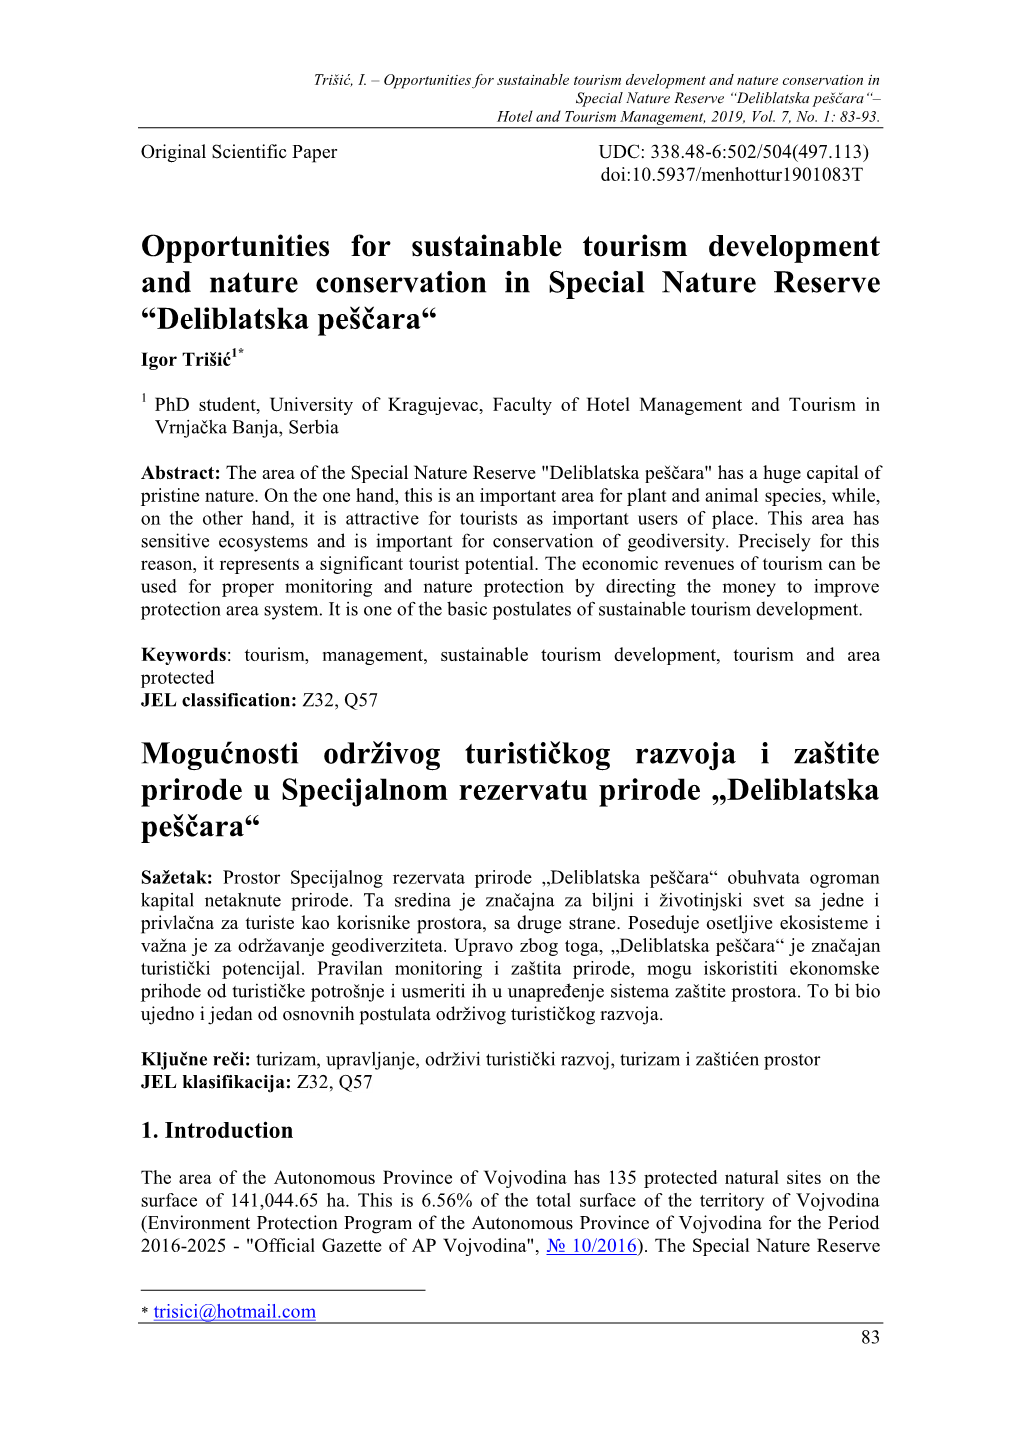 Opportunities for Sustainable Tourism Development and Nature Conservation in Special Nature Reserve “Deliblatska Peščara“– Hotel and Tourism Management, 2019, Vol